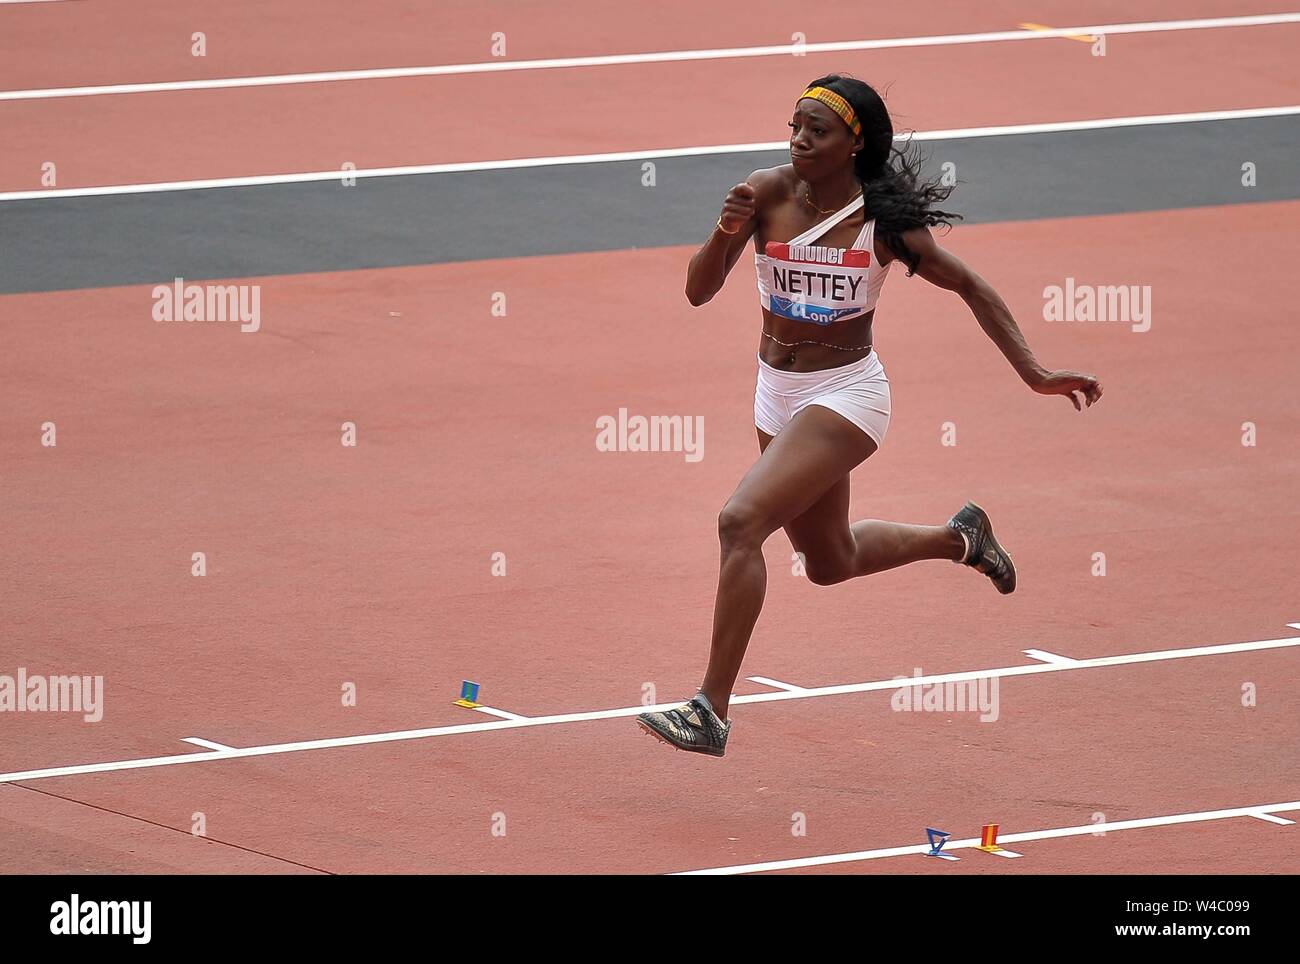 London, UK. 21 July 2019. Christabel Nettey (CAN) in the womens long jump. Anniversary Games athletics. London stadium. Stratford. London. UK. Credit Garry Bowden/SIP photo agency/Alamy Live News. Stock Photo